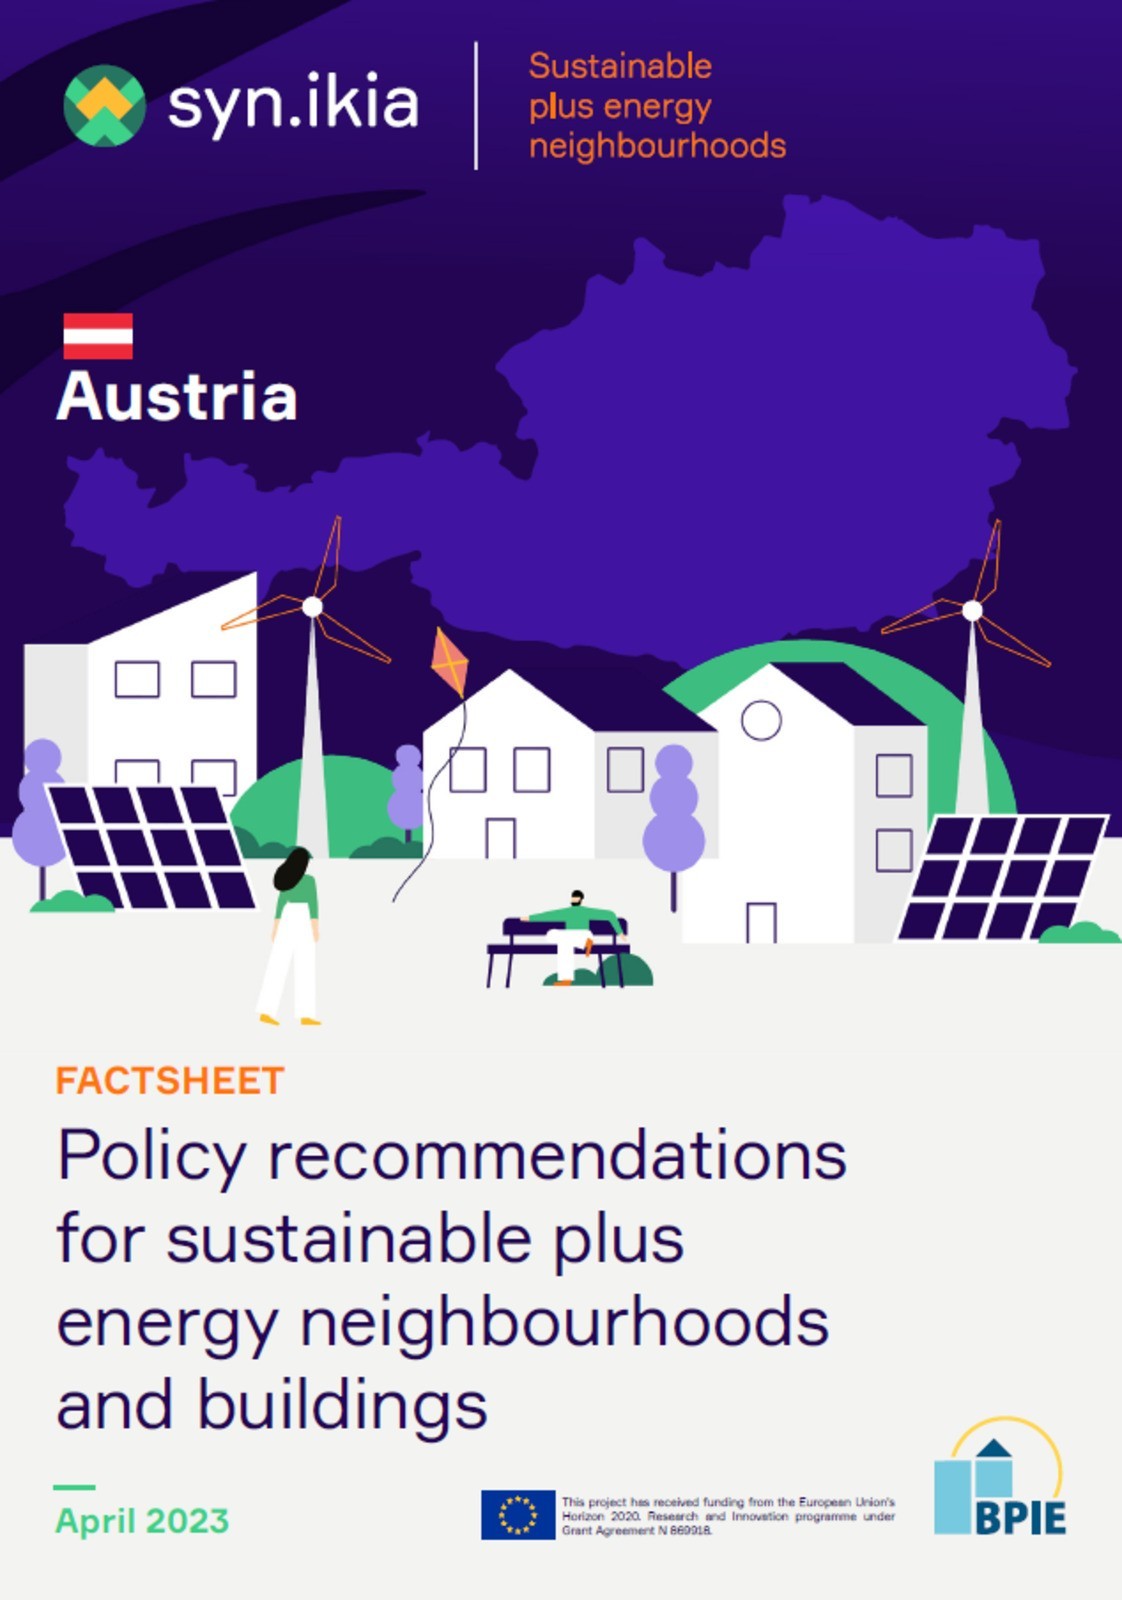 Policy recommendations for sustainable plus energy neighbourhoods and buildings